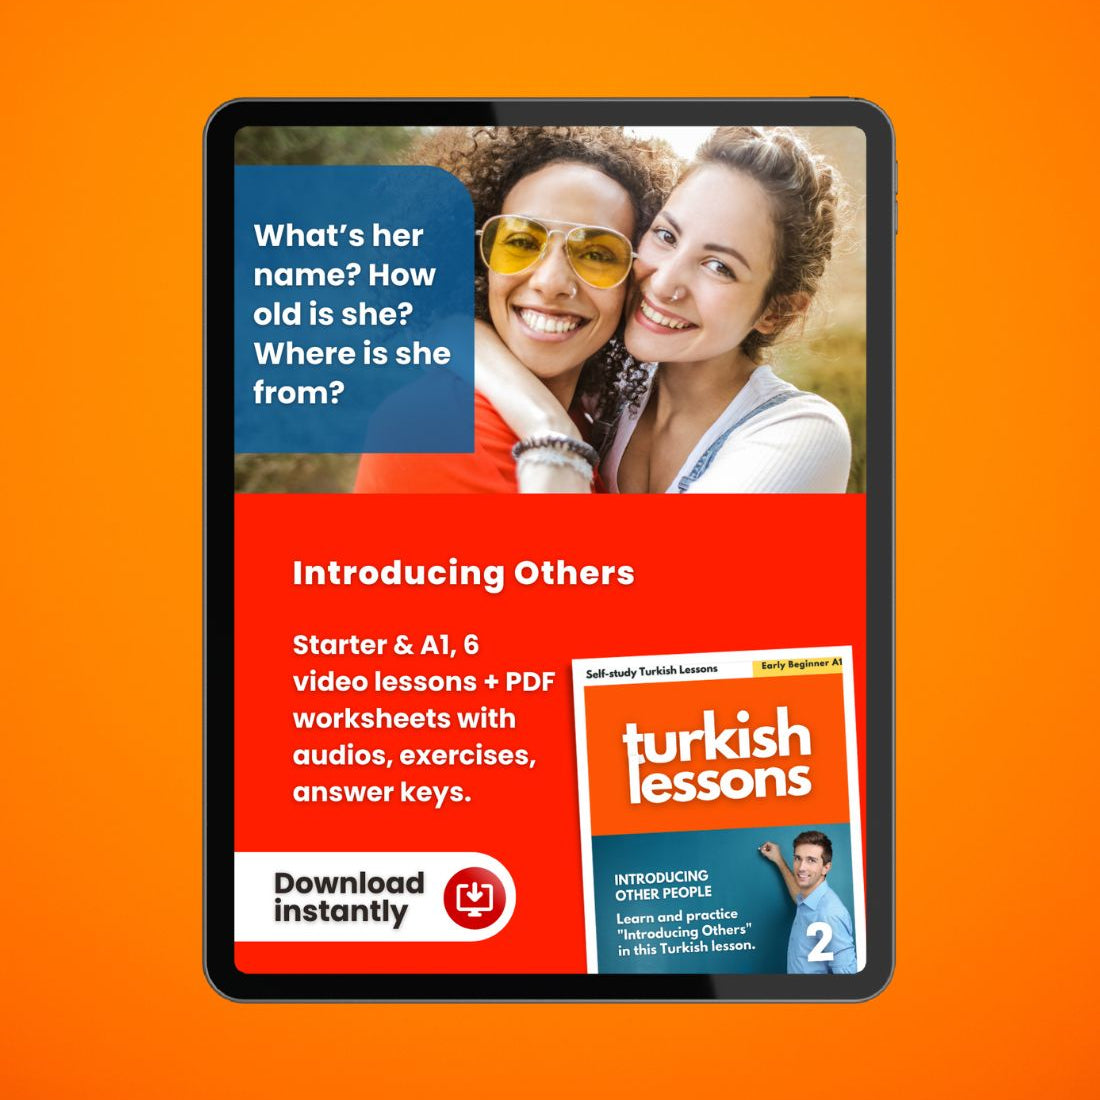 turkish lessons a1 - introducing others in turkish language